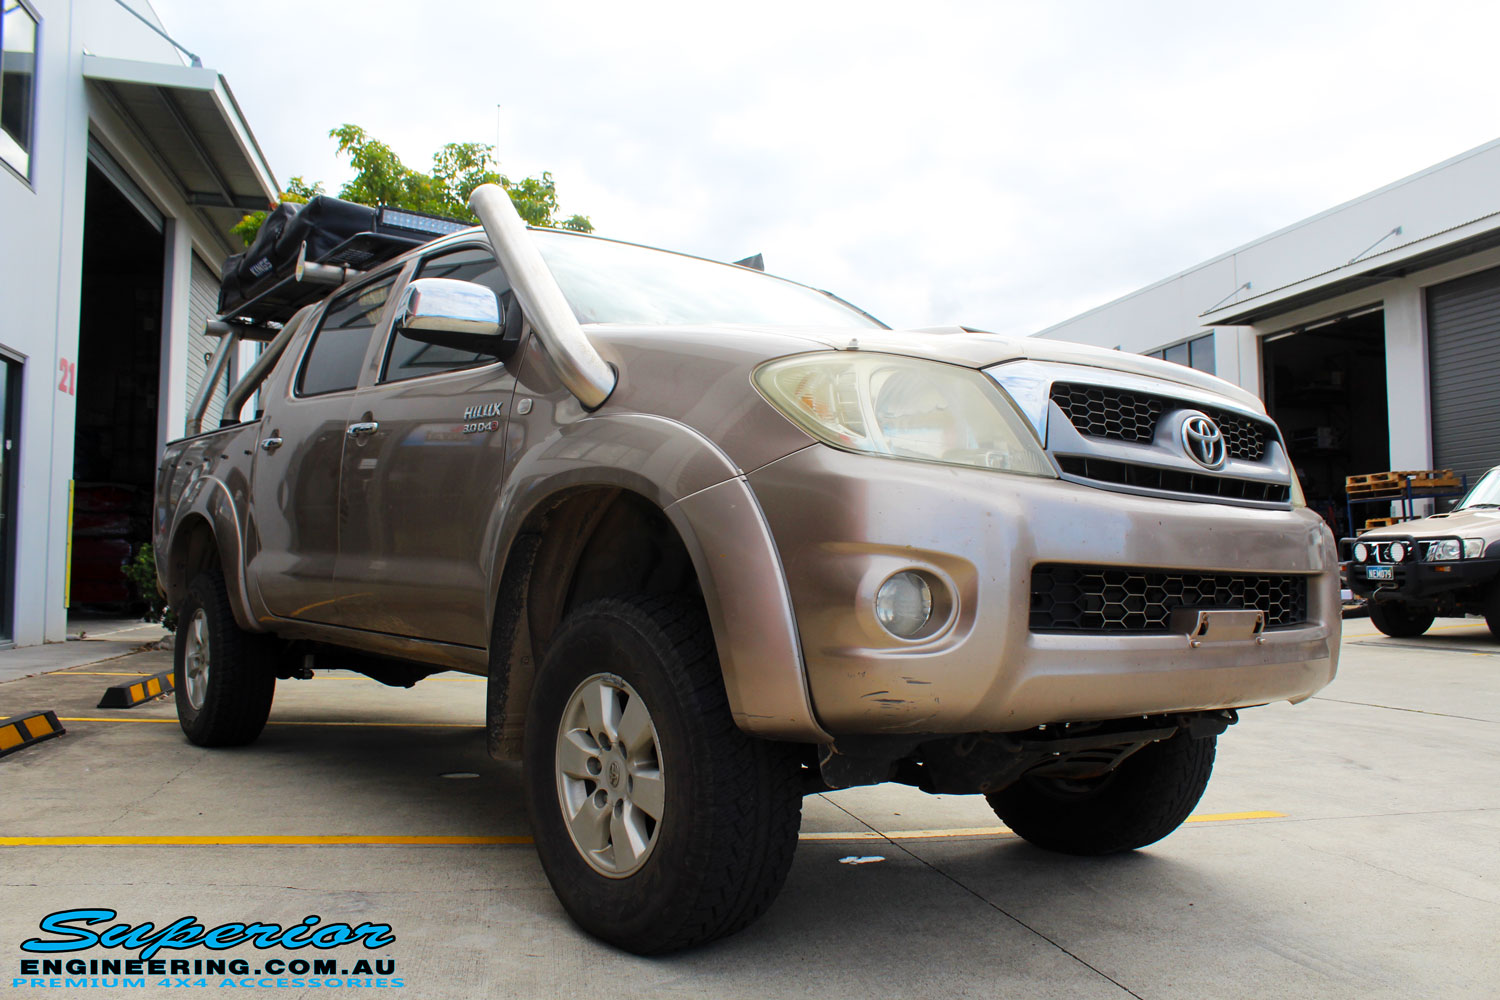 Right front side view of a Toyota Vigo Hilux Dual Cab after fitment of a Superior Nitro Gas 3" Inch Lift Kit